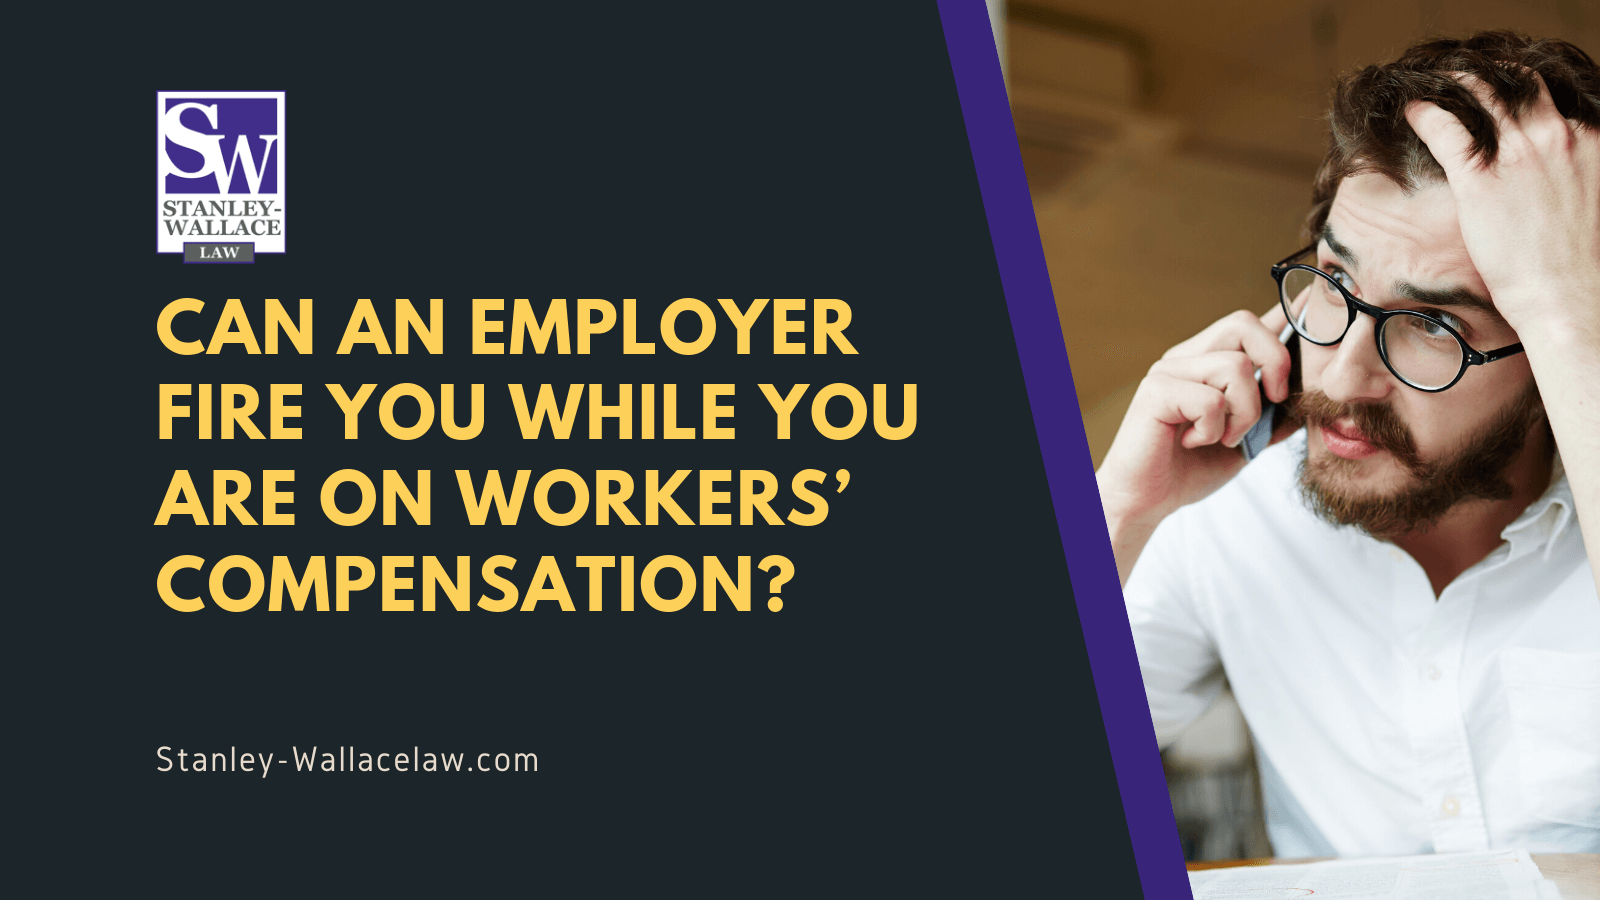 Can an Employer Fire You While You are on Workers’ Compensation? - Stanley-Wallace Law - slidell louisiana